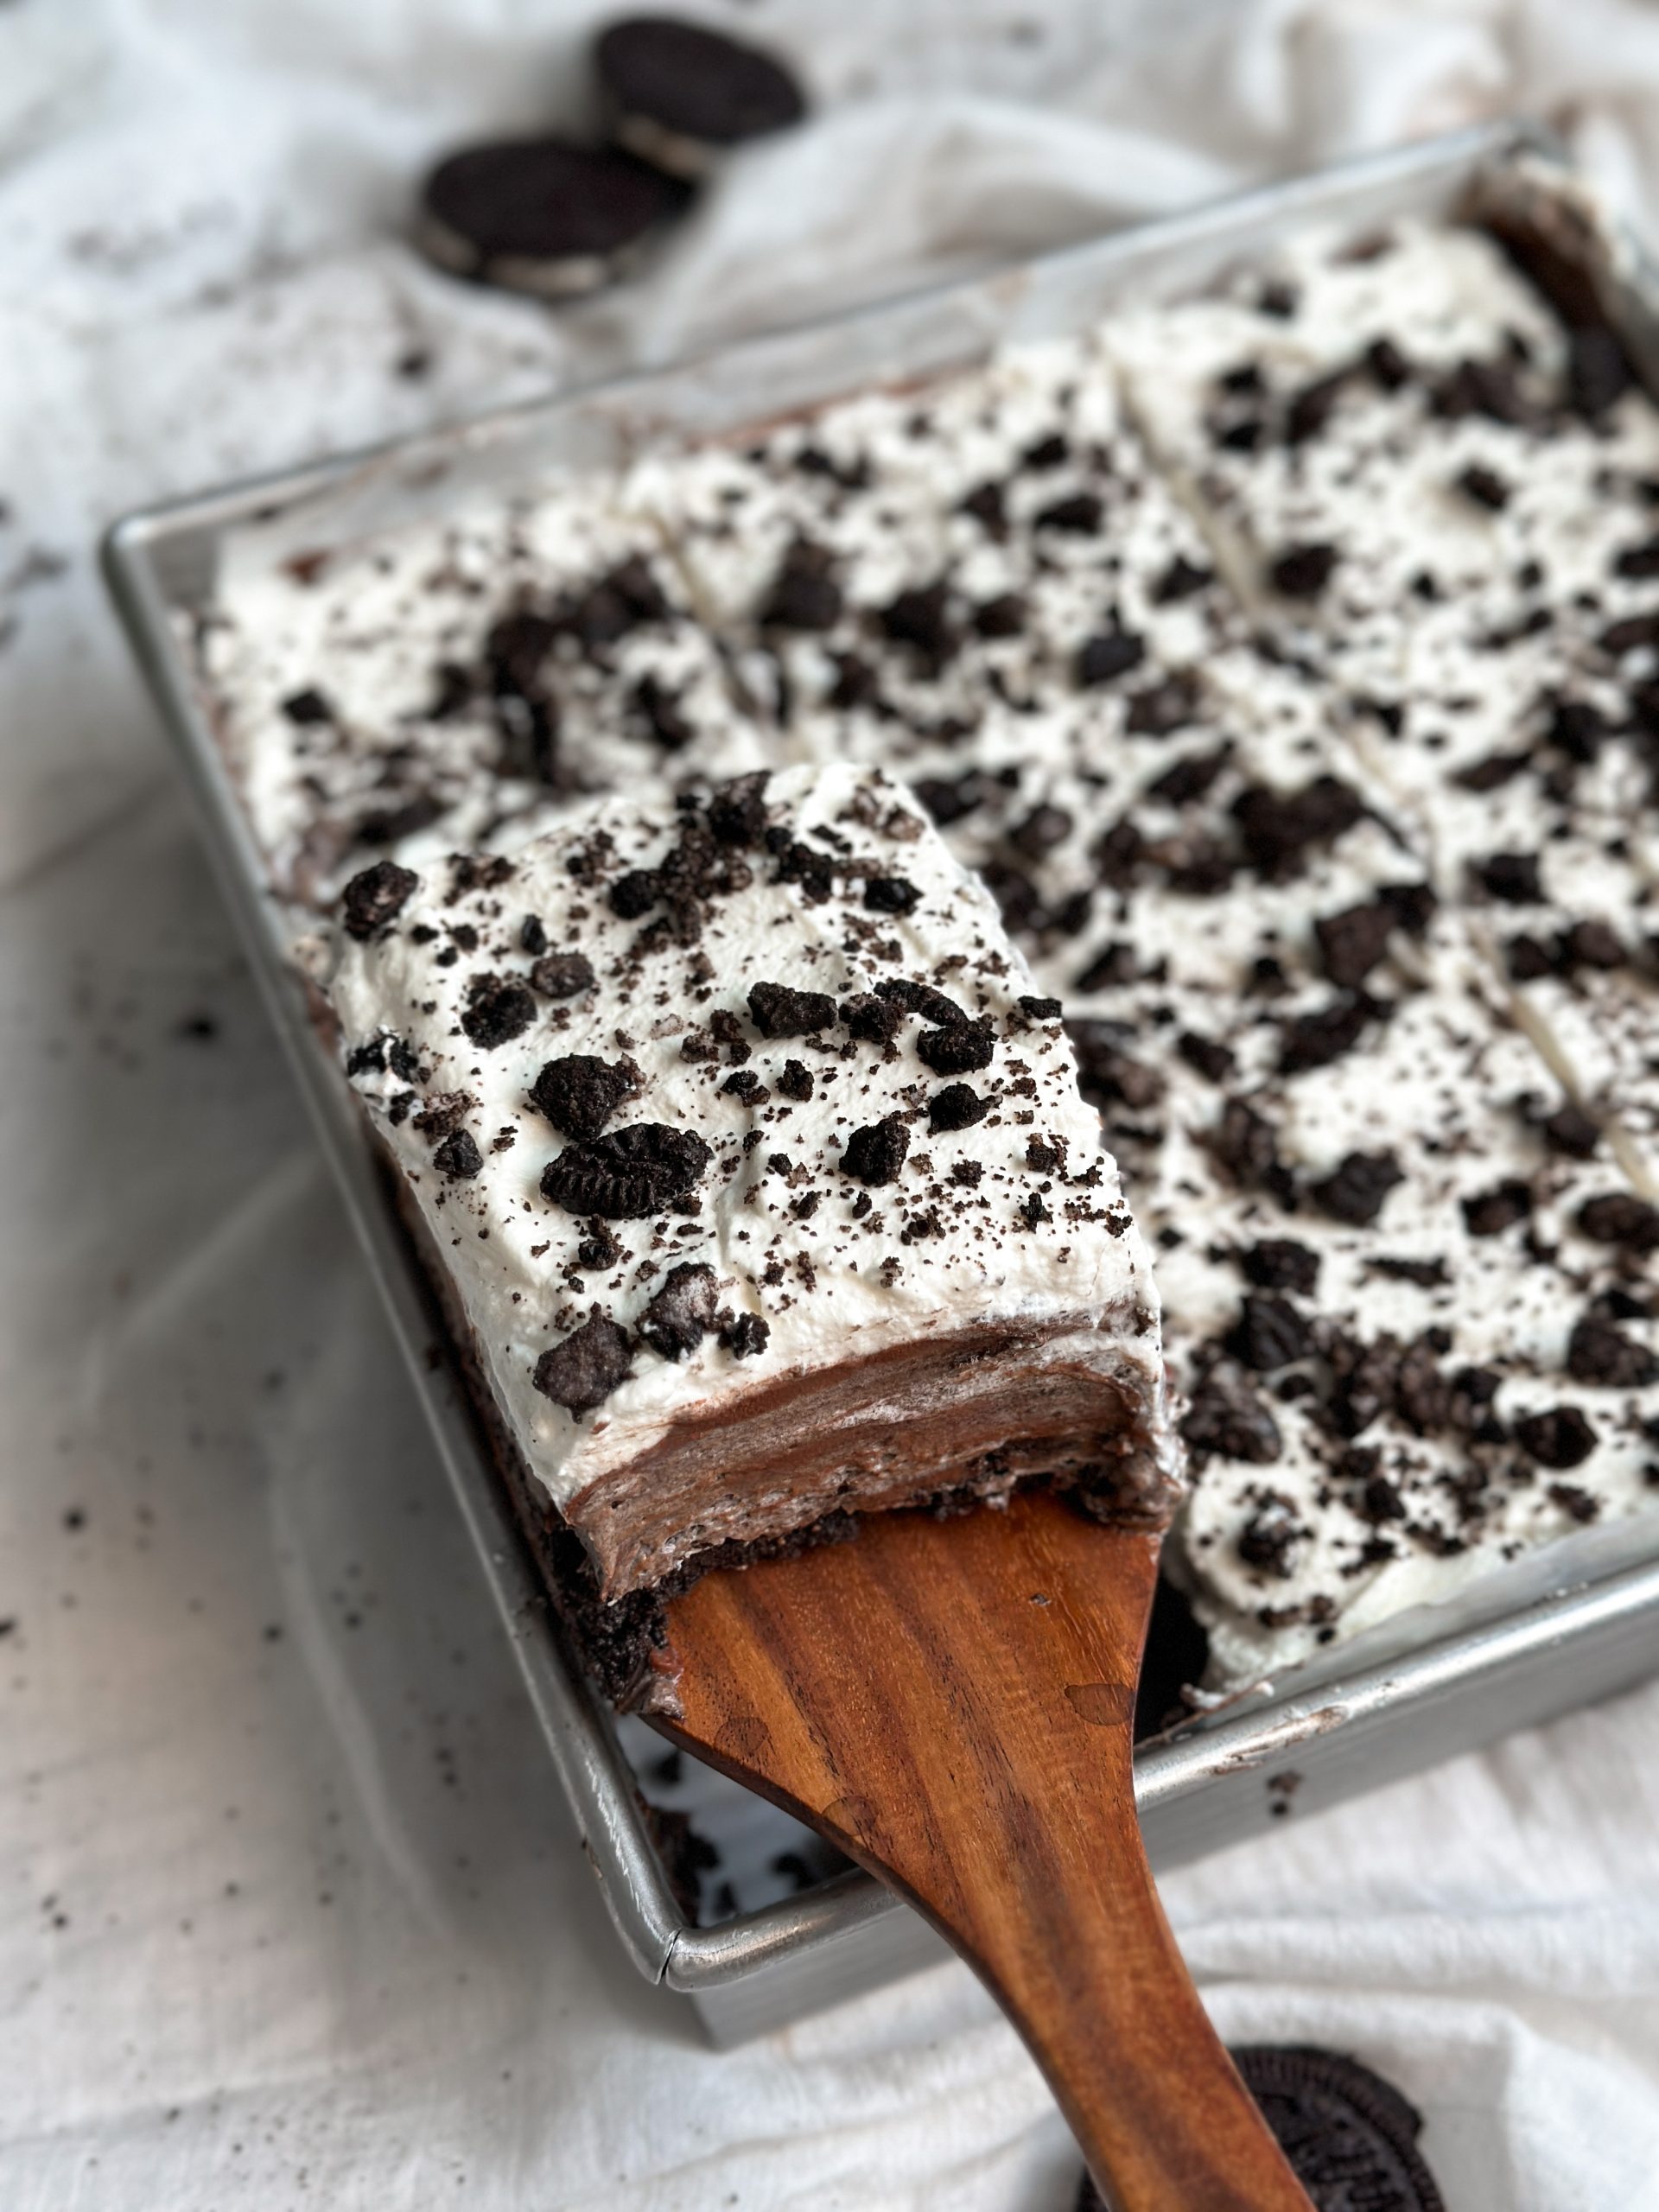 a baking dish with a no bake cookies & cream (oreo) mousse cake, a spatula is pulling out one slice revealing layers of mousse and ganache